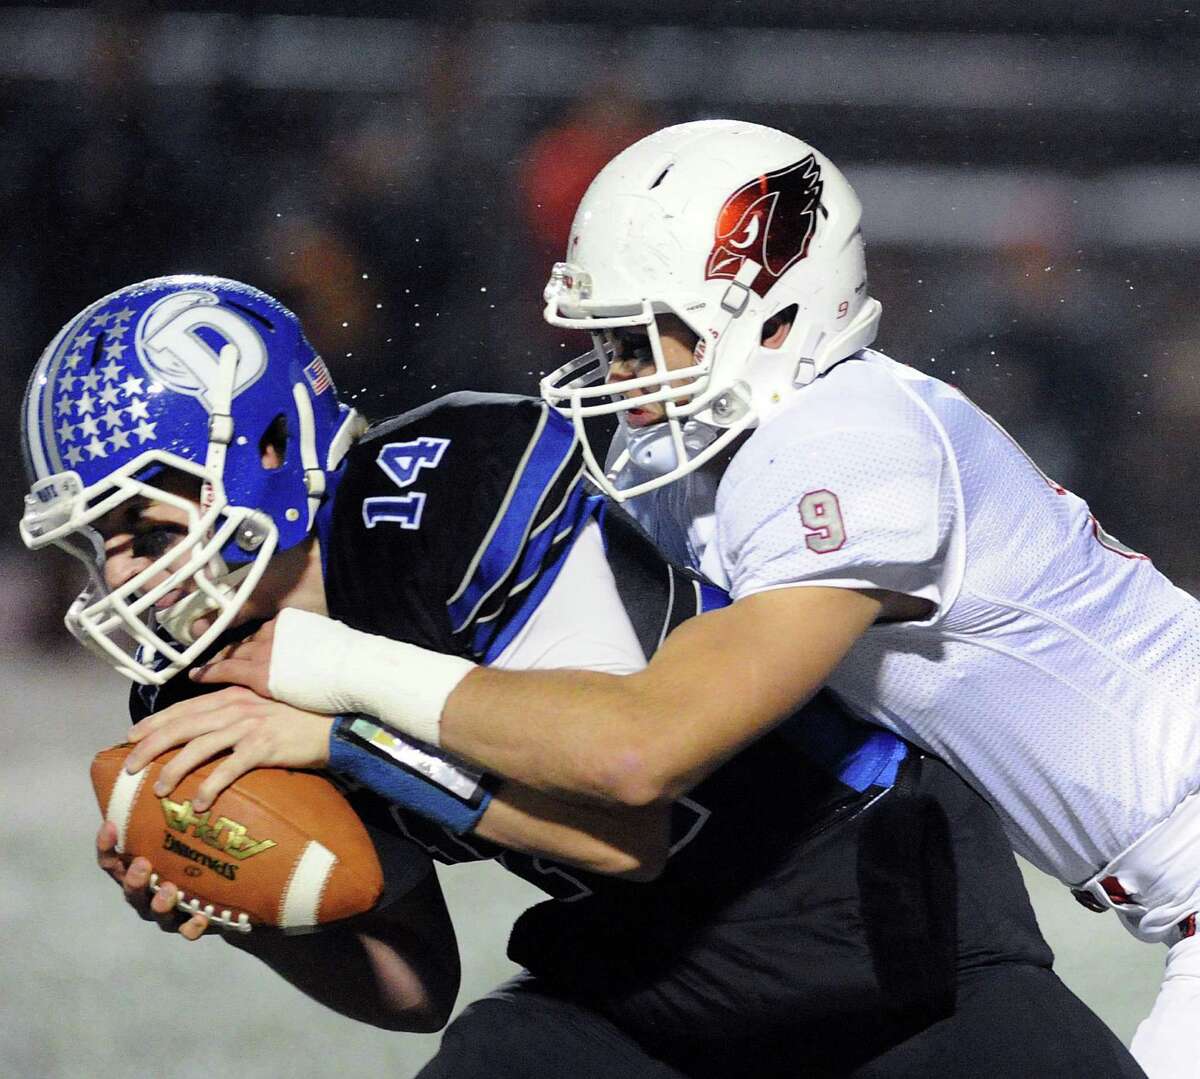 At left, Darien quarterback Brian Peters (14) is sacked by Ian Pearson (9) of Greenwich during the Class LL high school football playoff game between Greenwich High School and Darien High School at Stamford High School, Conn., Tuesday night, Nov. 29, 2016.